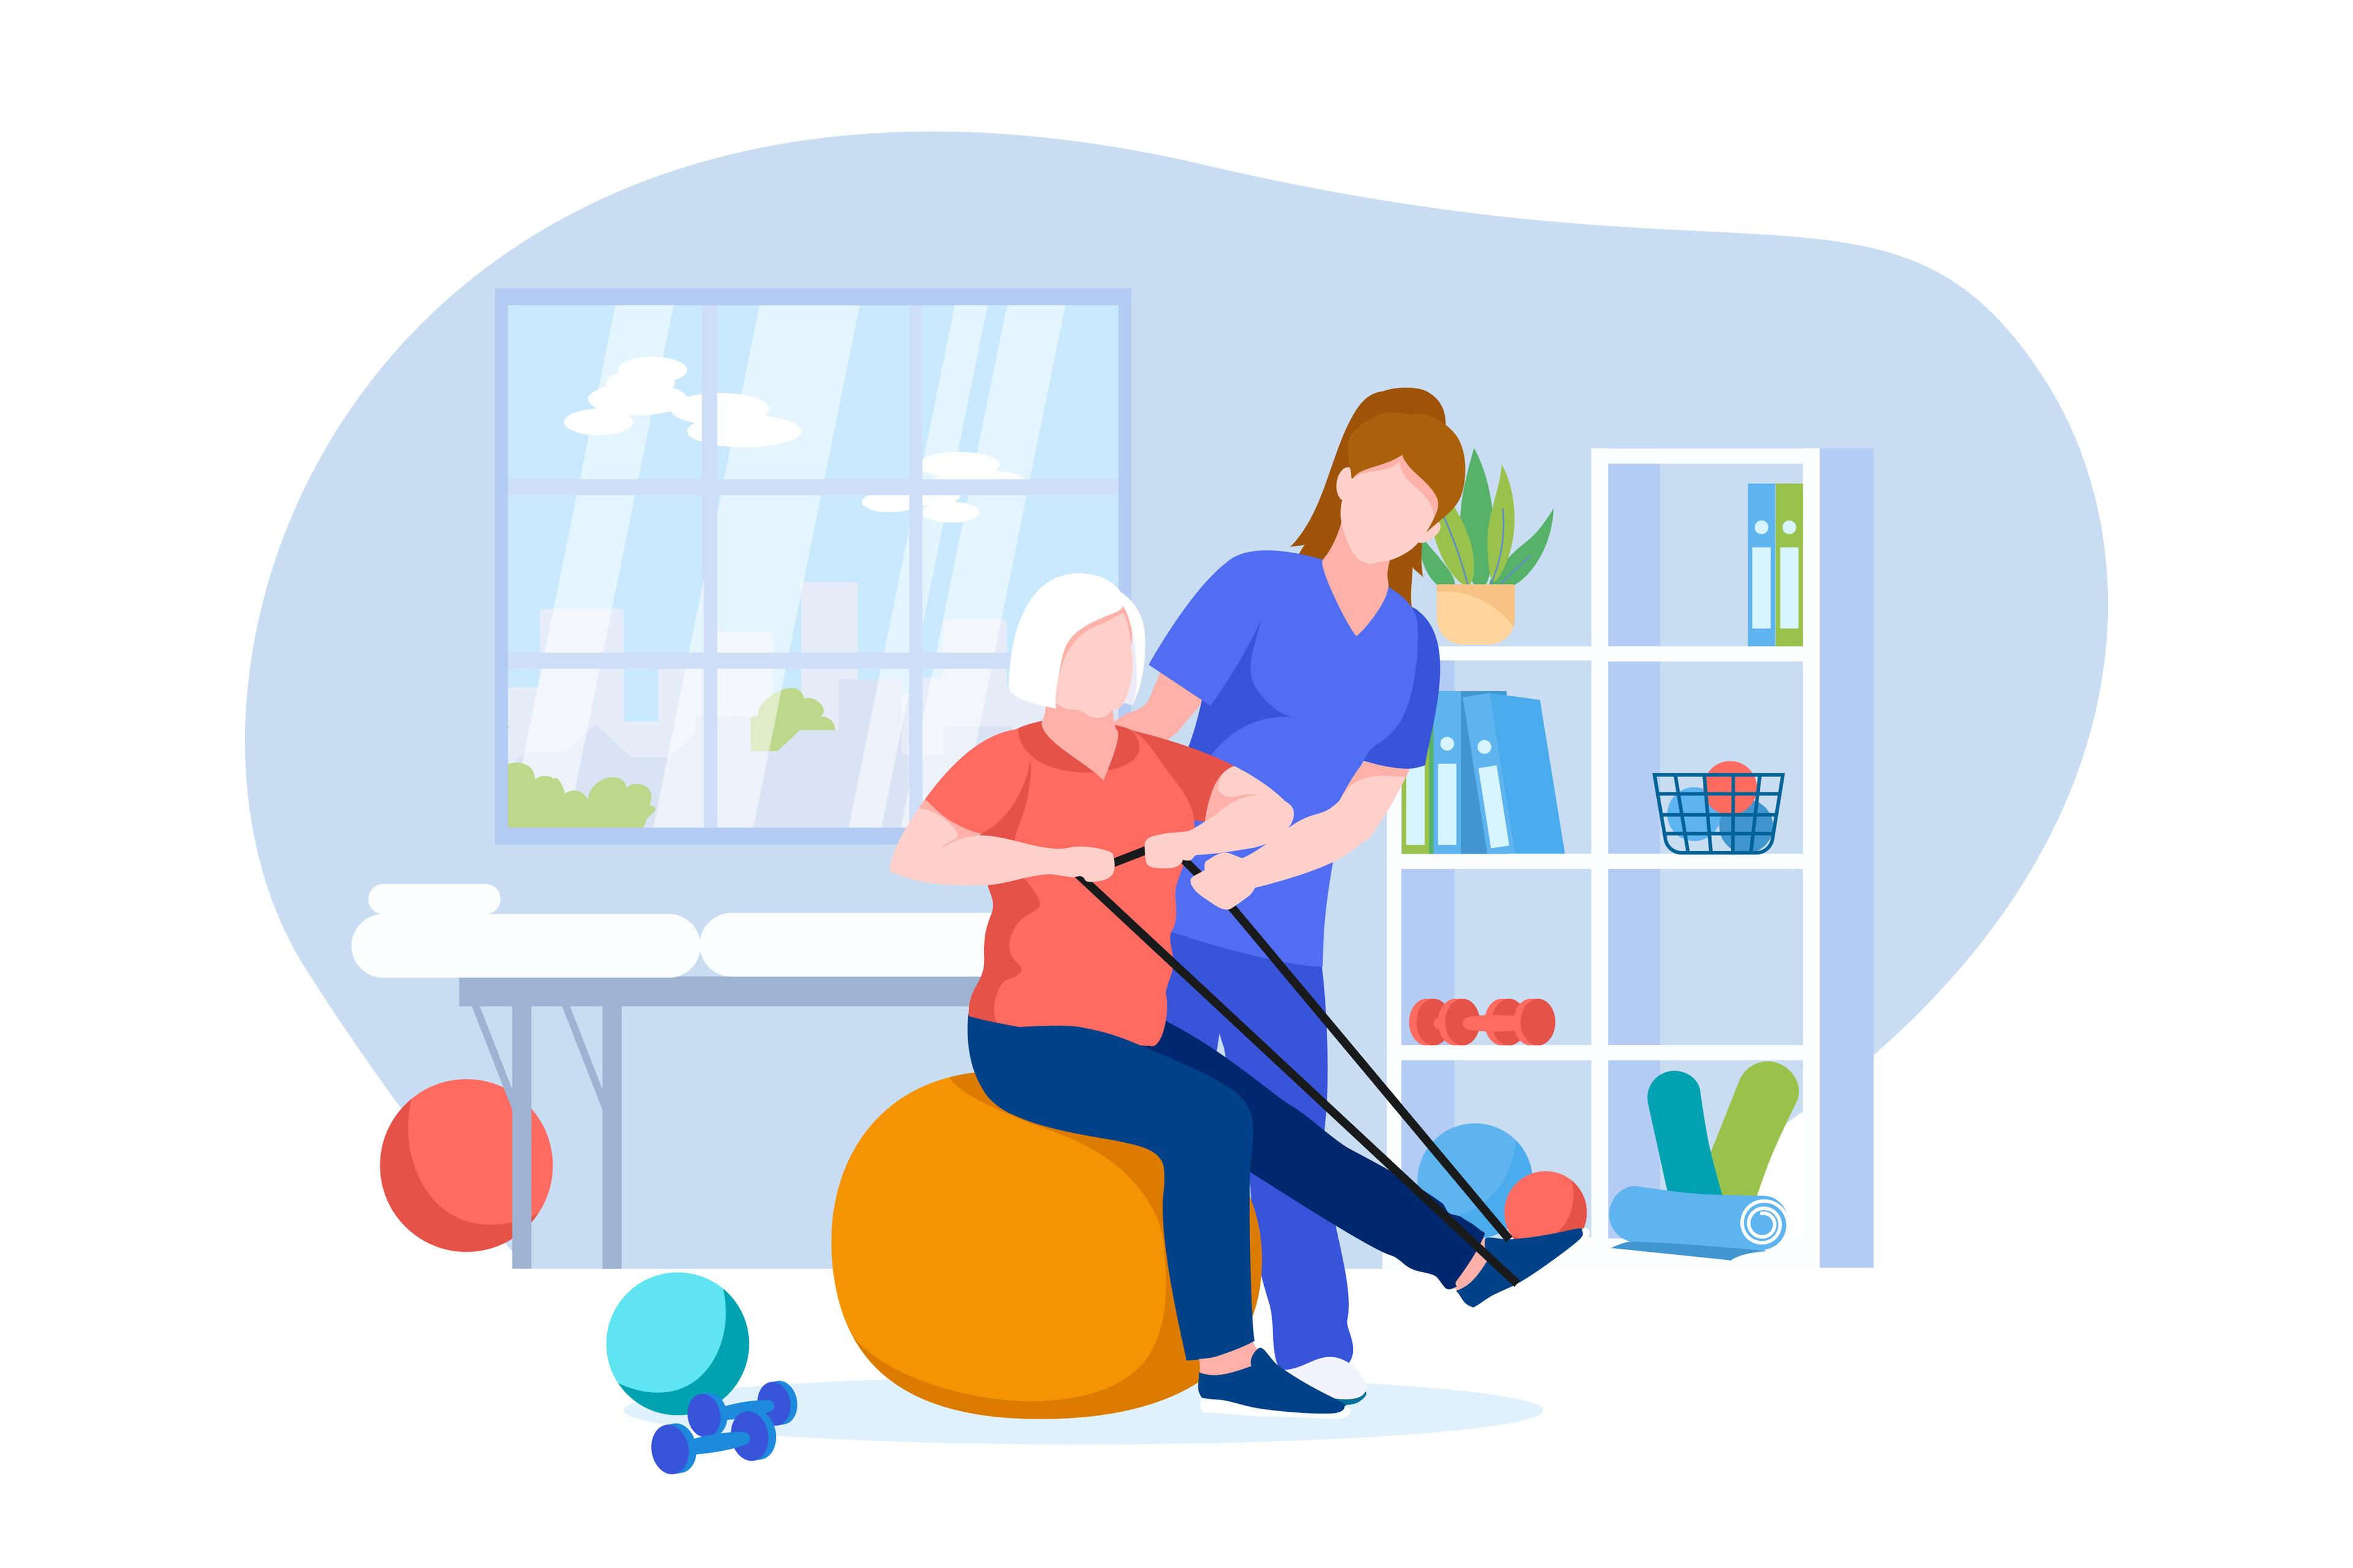 Graphic illustration of chiropractor working with patient